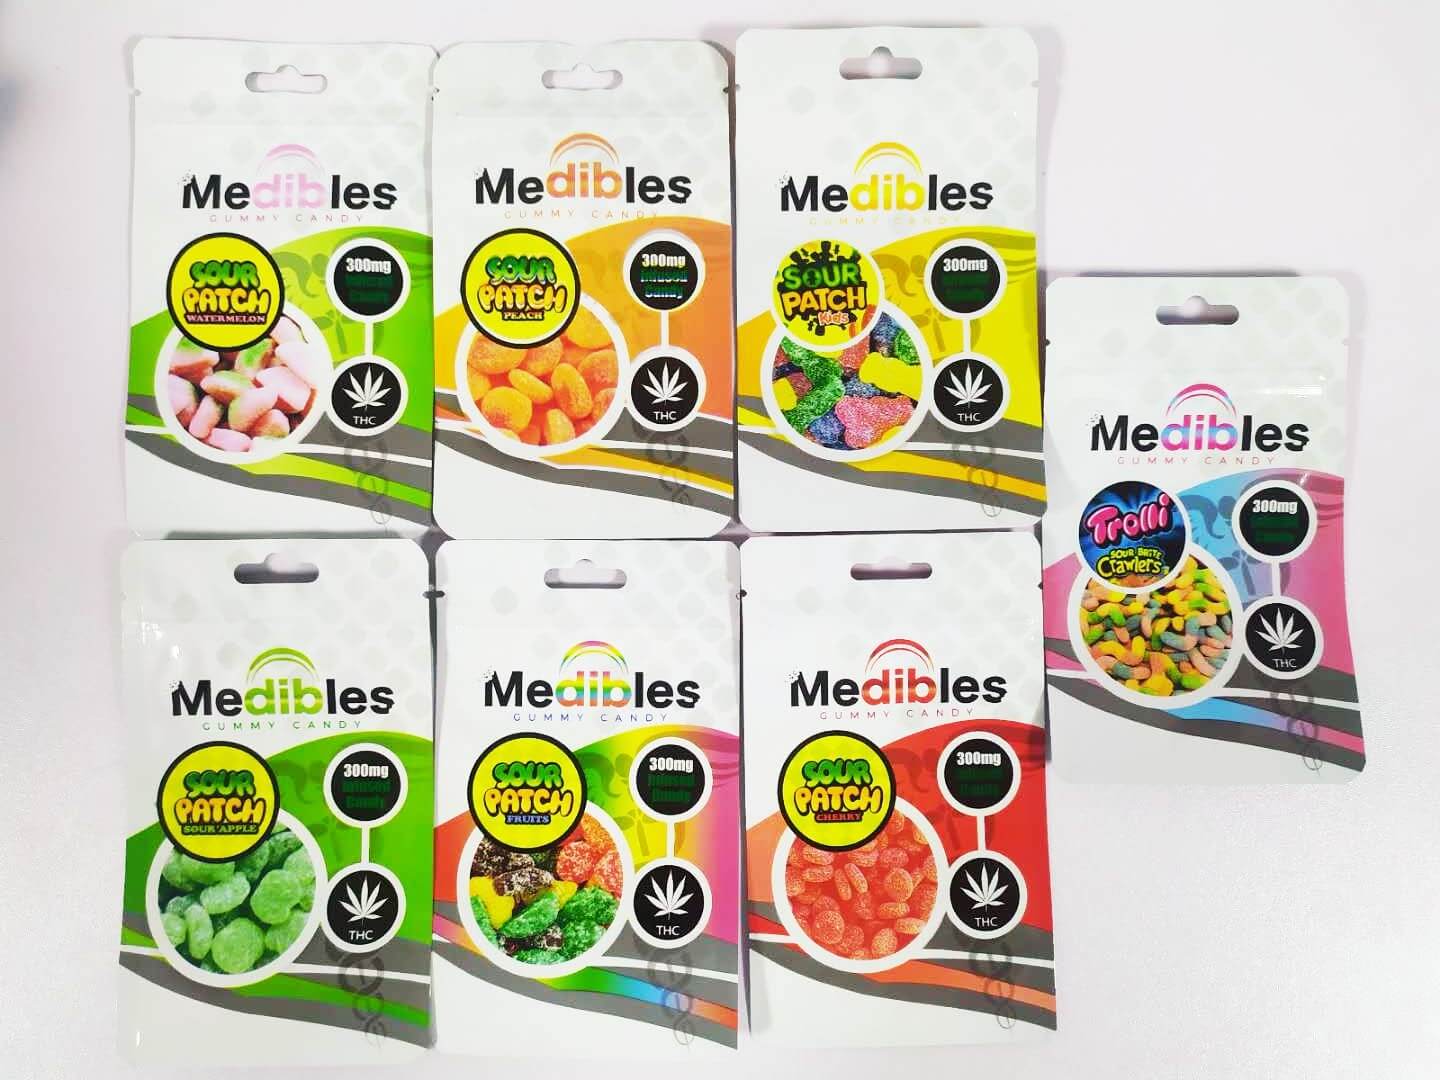 Medible S/Patch 300mg